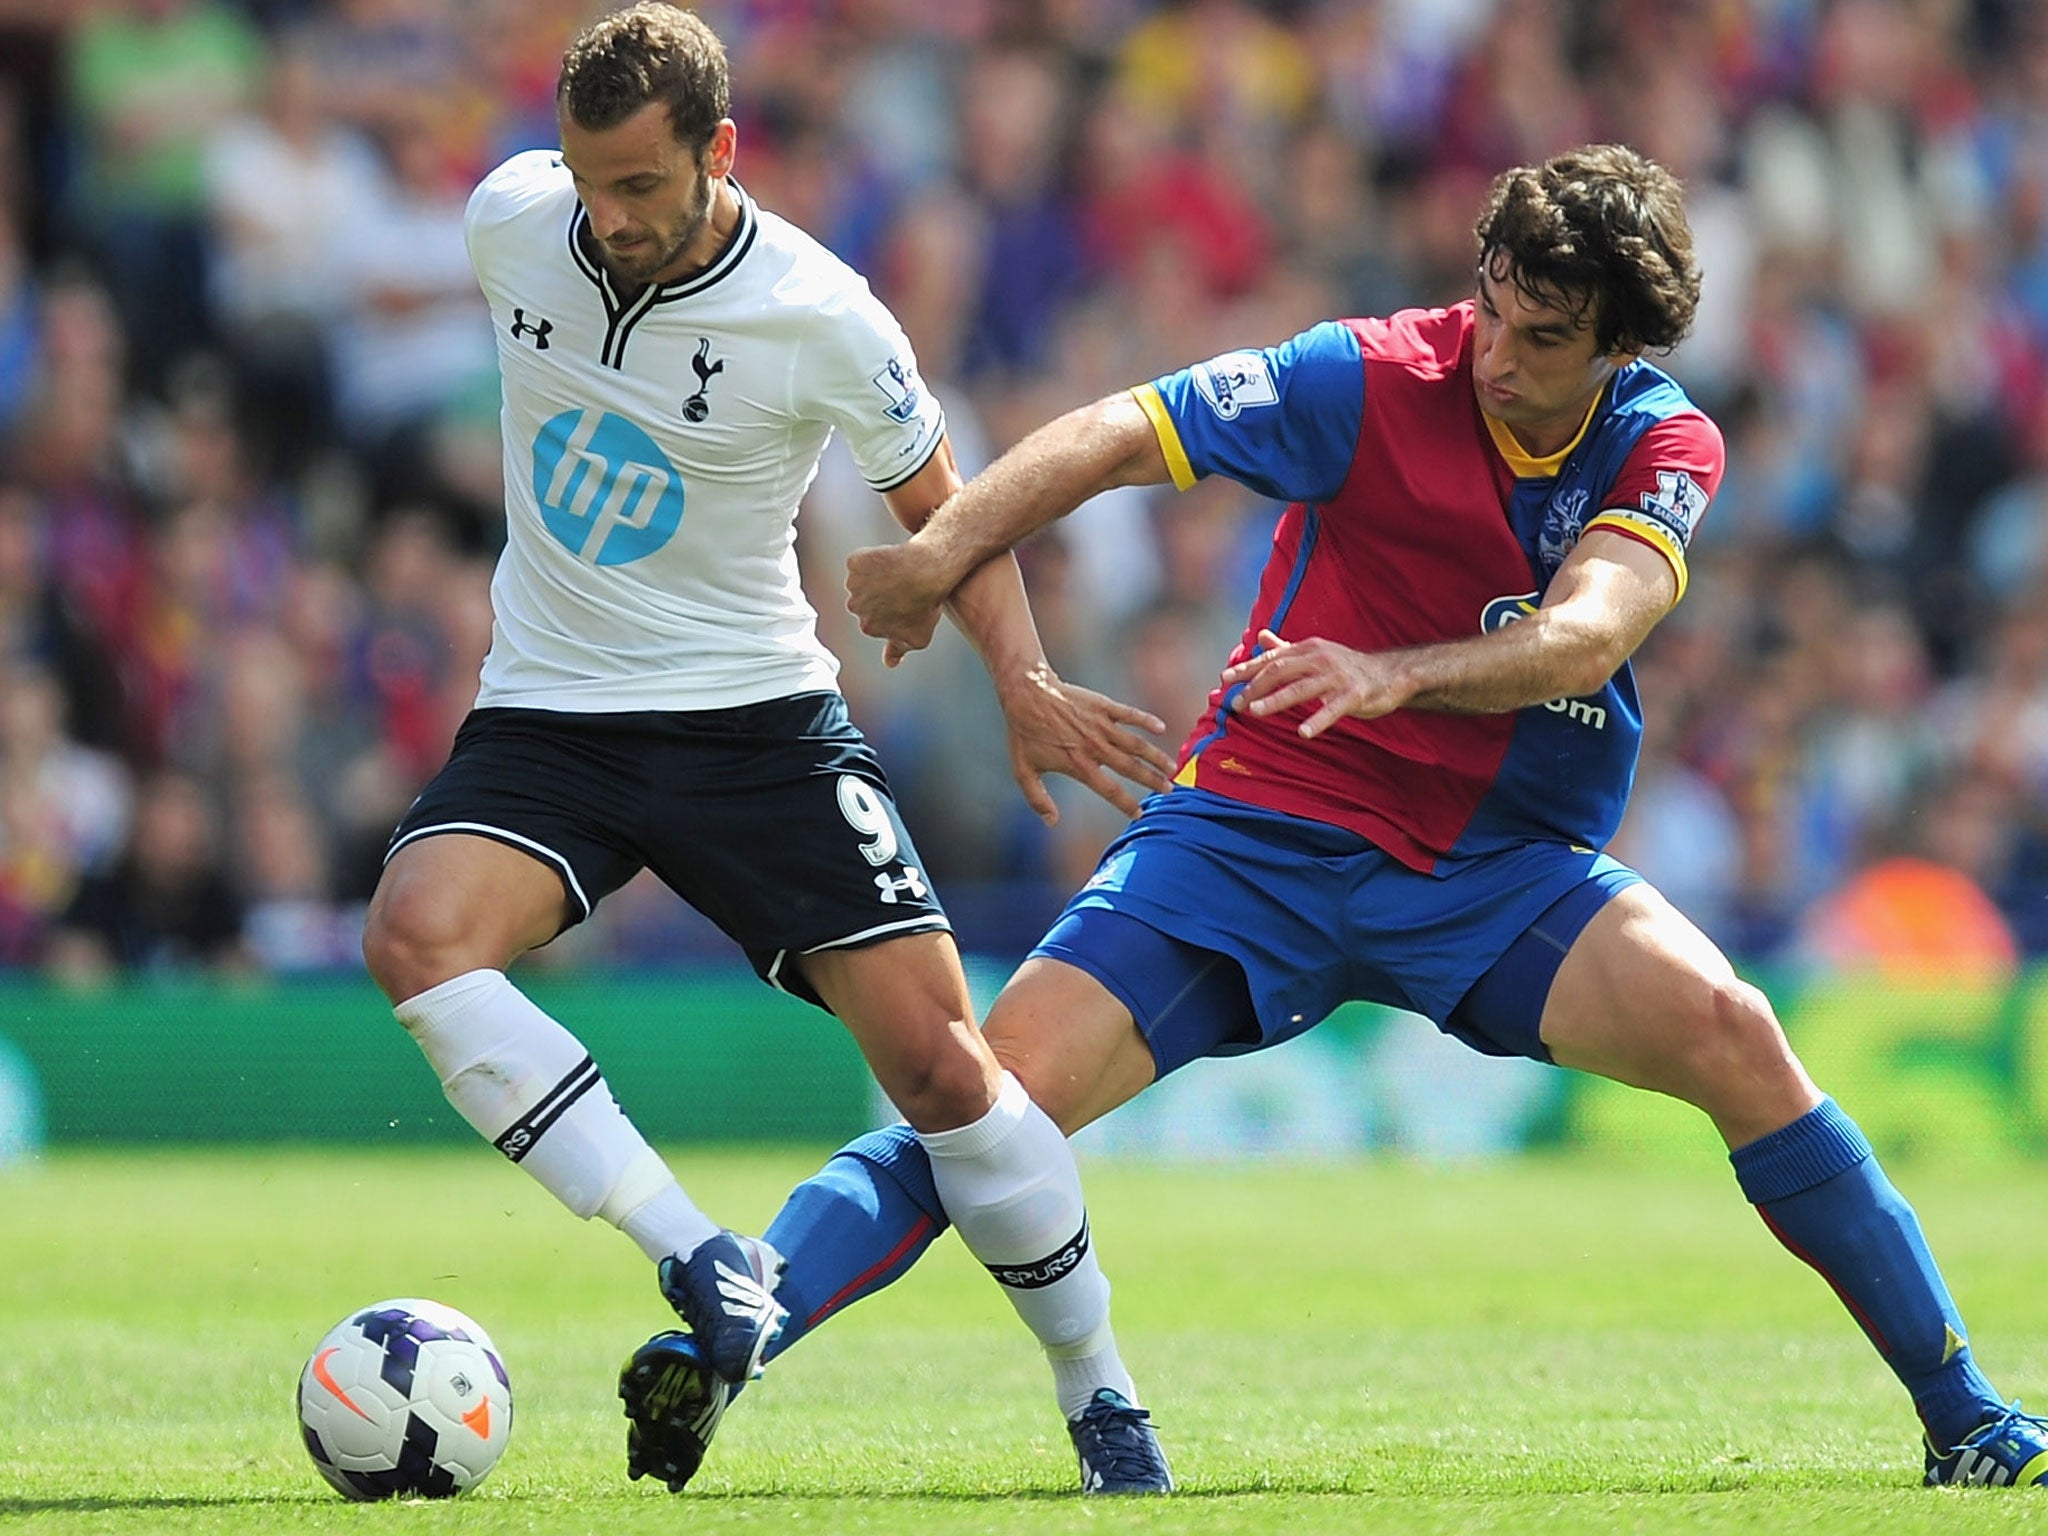 Roberto Soldado opened the scoring on his Tottenham debut with a penalty in the 50th minute